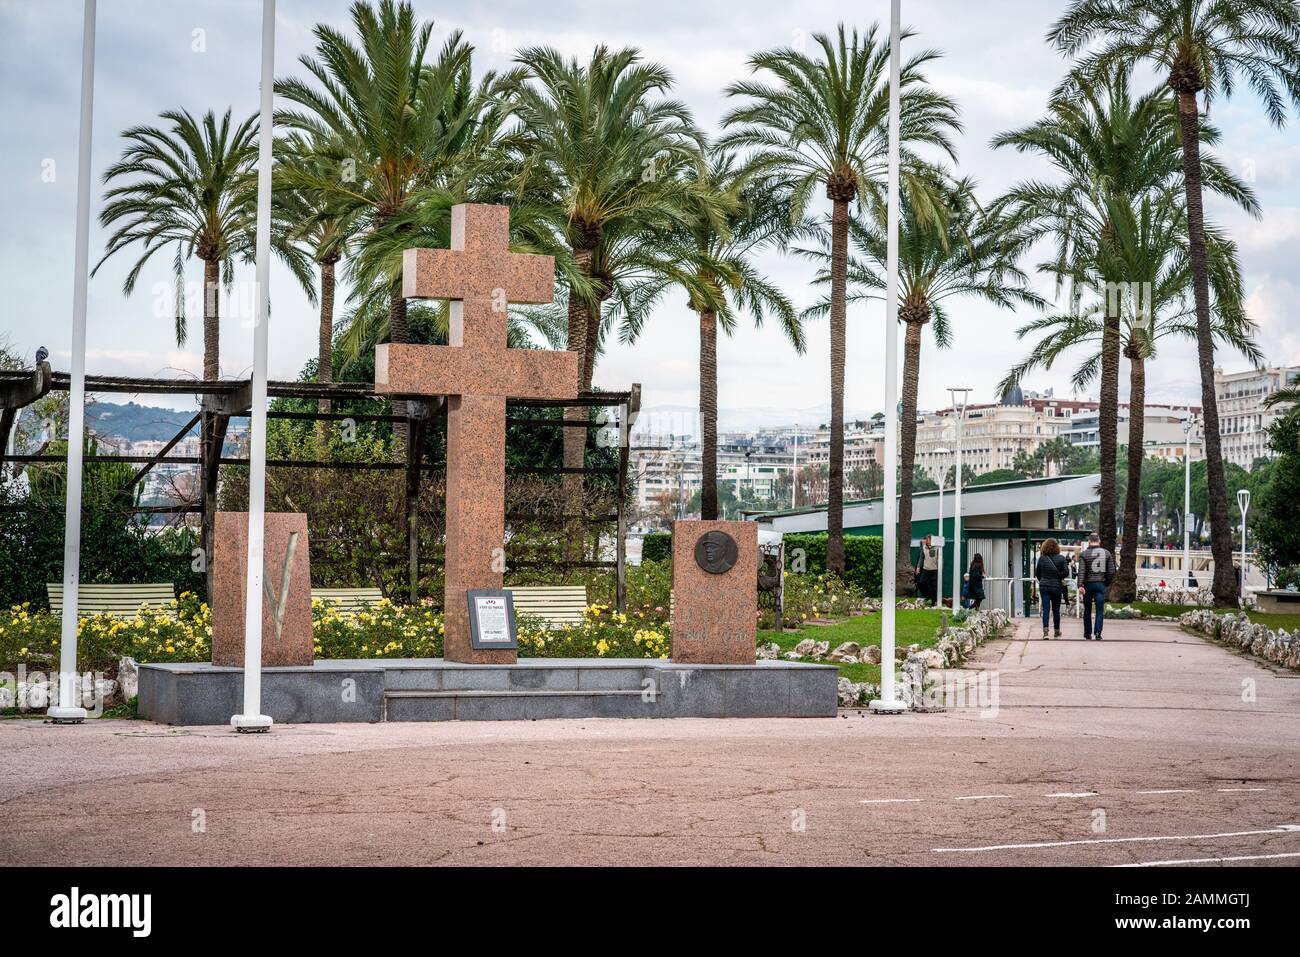 Cross of Lorraine on square of 8 May 1945 on Cannes Croisette promenade France Stock Photo